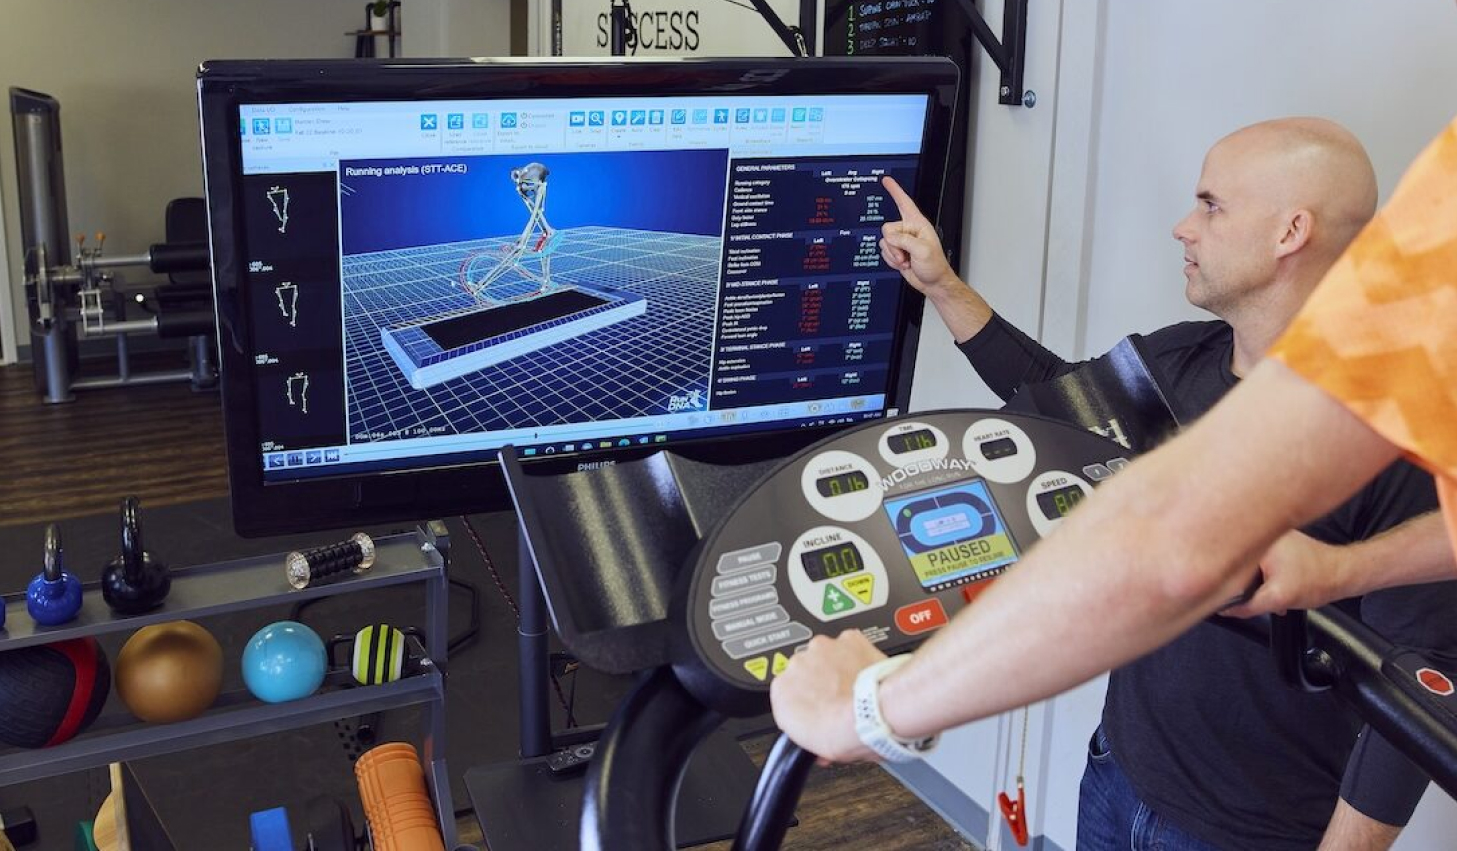 Runner undergoing gait analysis in a lab to customize their strength training program for optimal performance.